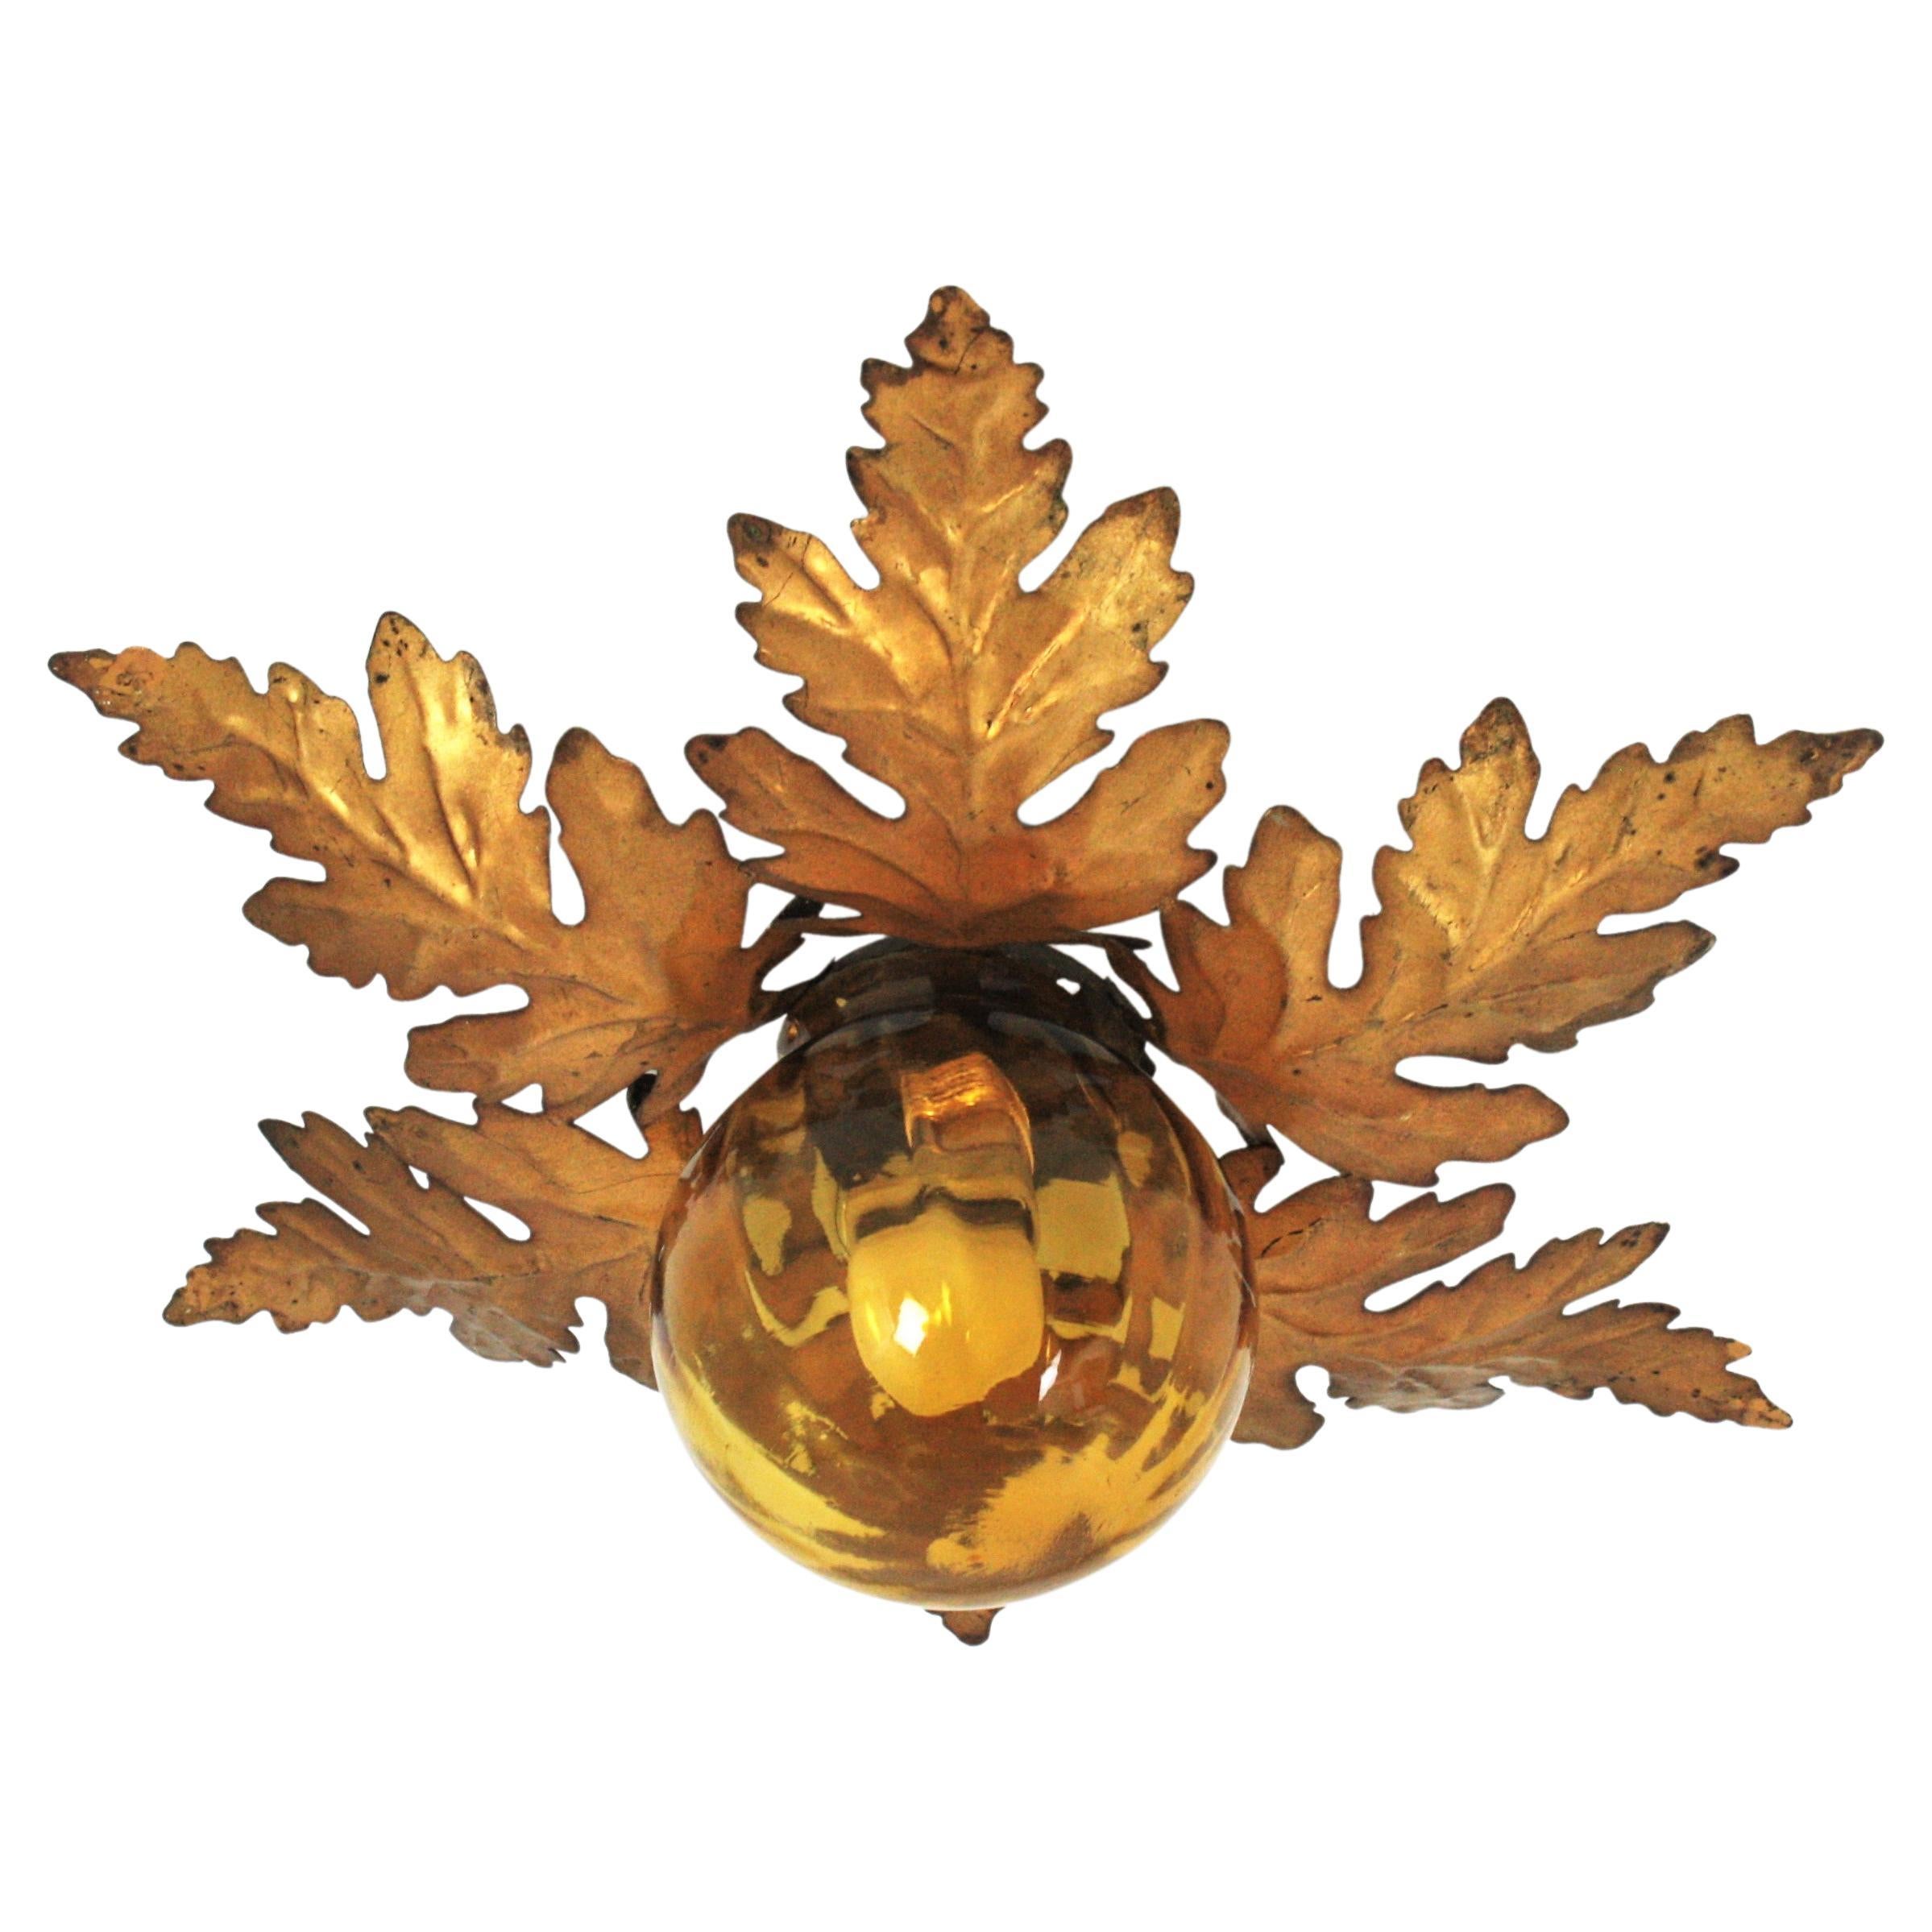 Beautiful flush mount or wall light with handblown amber glass globe shade and foliage frame. Manufactured by Ferro Art, Spain, 1960s.
This lovely ceiling light has a nice design with branches and leaves surrounding a central glass globe shade in